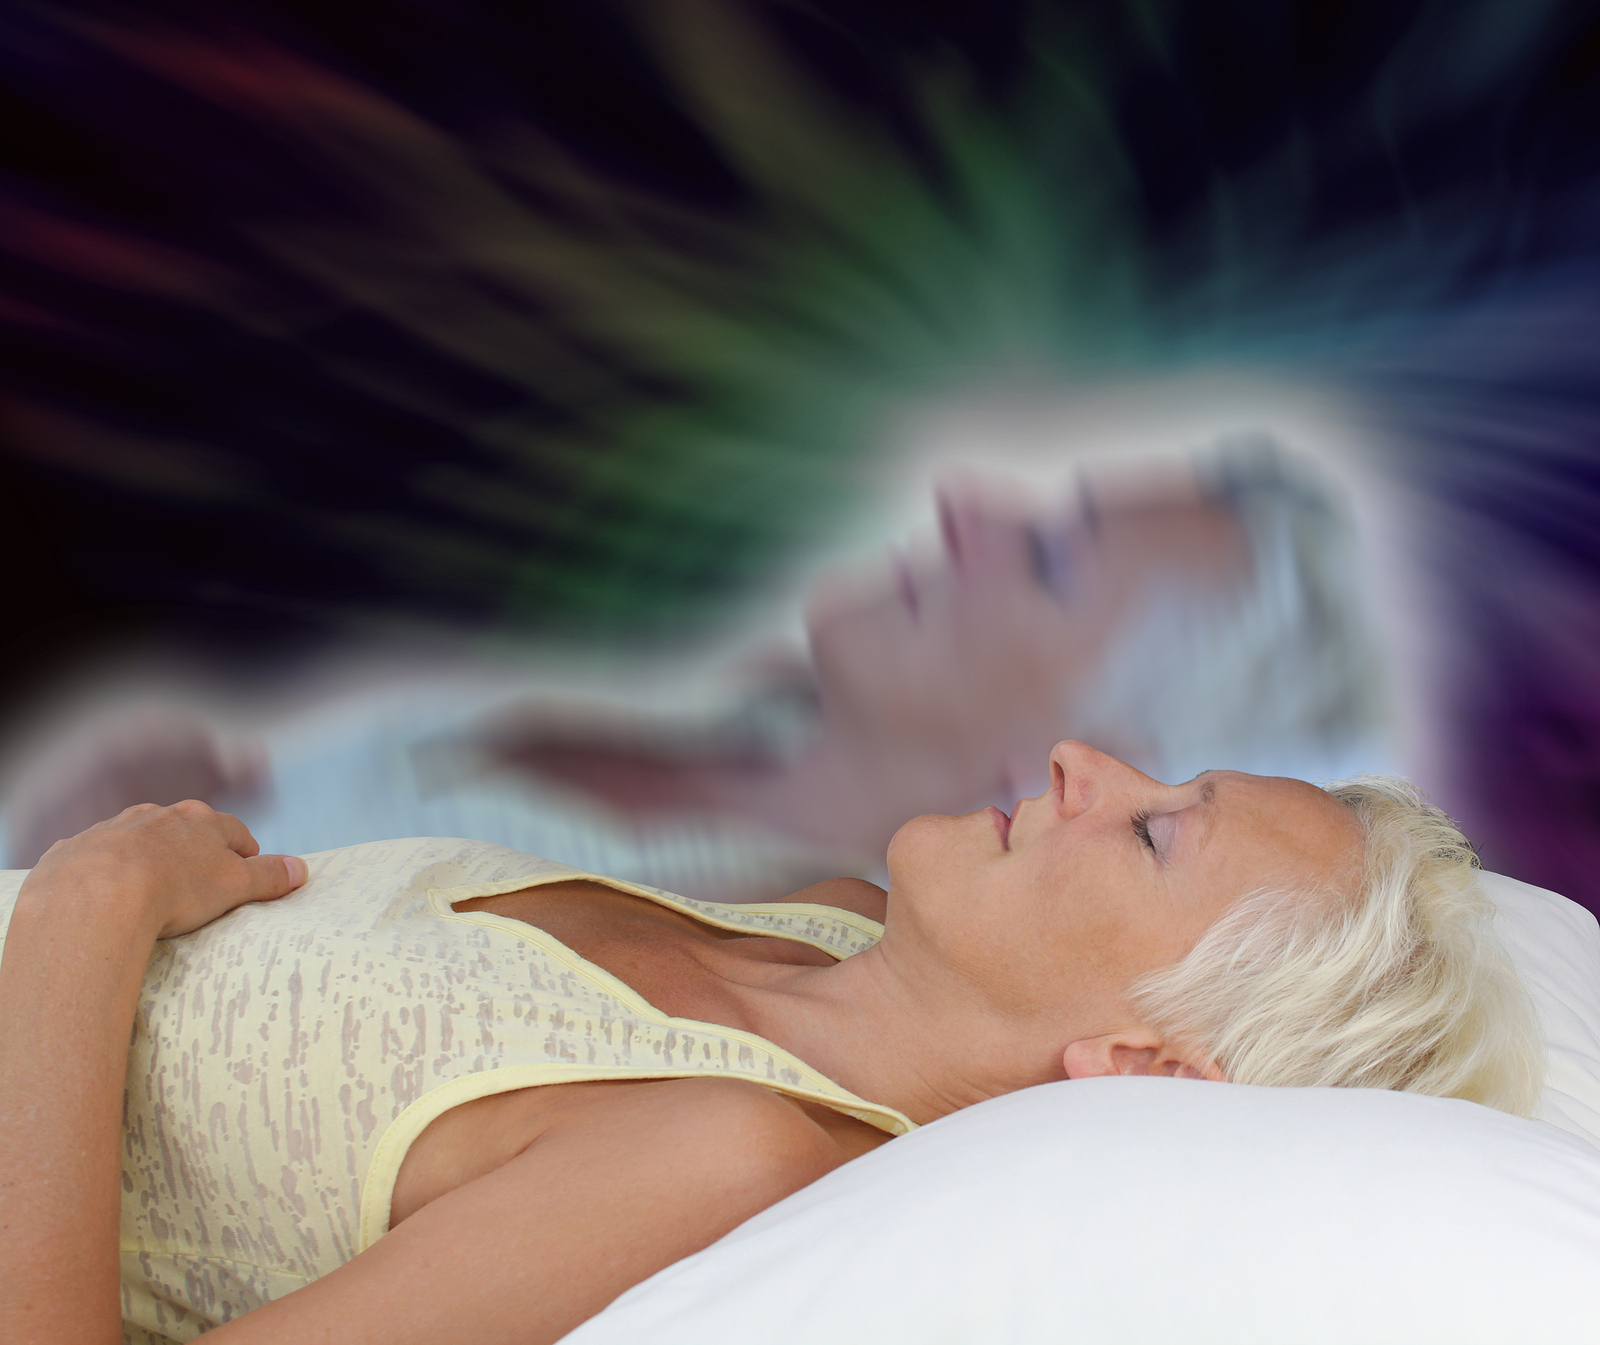 Female lying supine with eyes closed experiencing astral projection on dark background showing soul leaving body